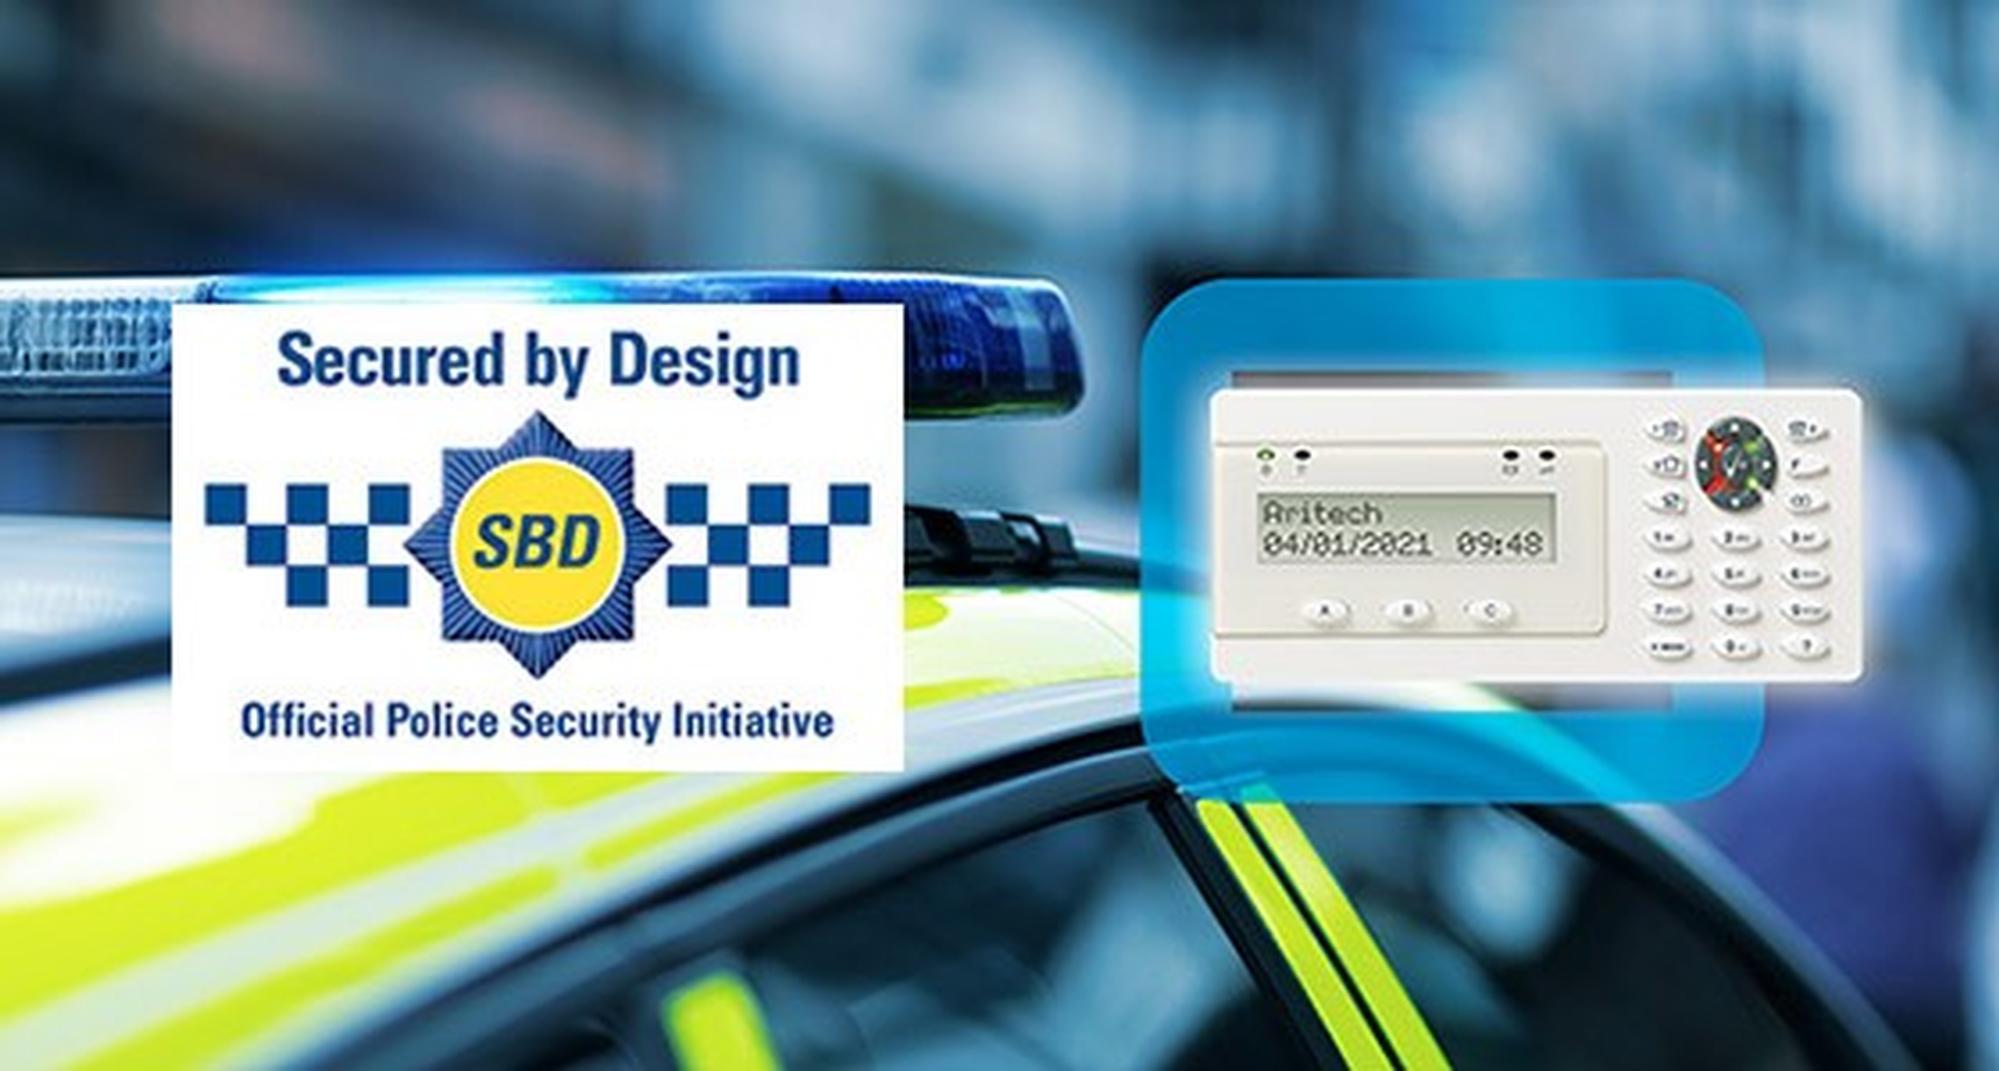 Carrier is pleased to announce that our Aritech Advisor Advanced control panels are now ‘Secured by Design’ (SBD) UK Police approved